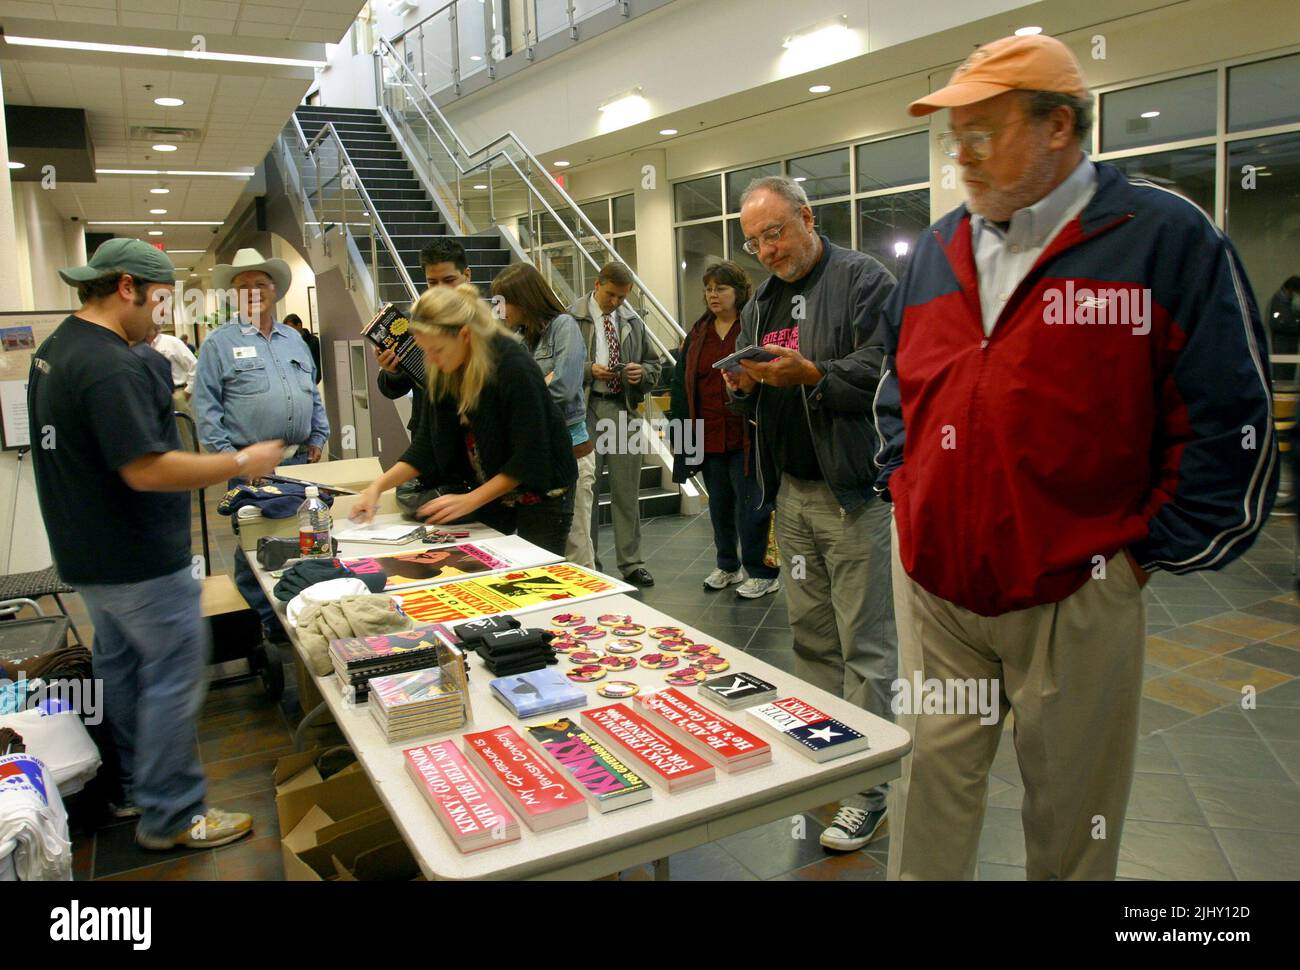 Kinky Friedman gubernatorial campaign Director of Merchandising Blake Waxler (left) talks with attendees as they examine a table full of bumper stickers, buttons, hats and other campaign merchandise during a campaign event on Thursday, Nov. 2, 2006 at Smith Entrepreneur Hall on the Texas Christian University campus in Fort Worth, Tarrant County, TX, USA. Friedman is one of two independent candidates hoping to unseat incumbent Republican Gov. Rick Perry to become the Lonestar State's first independent governor since Sam Houston in 1859. (Apex MediaWire Photo by Timothy J. Jones) Stock Photo